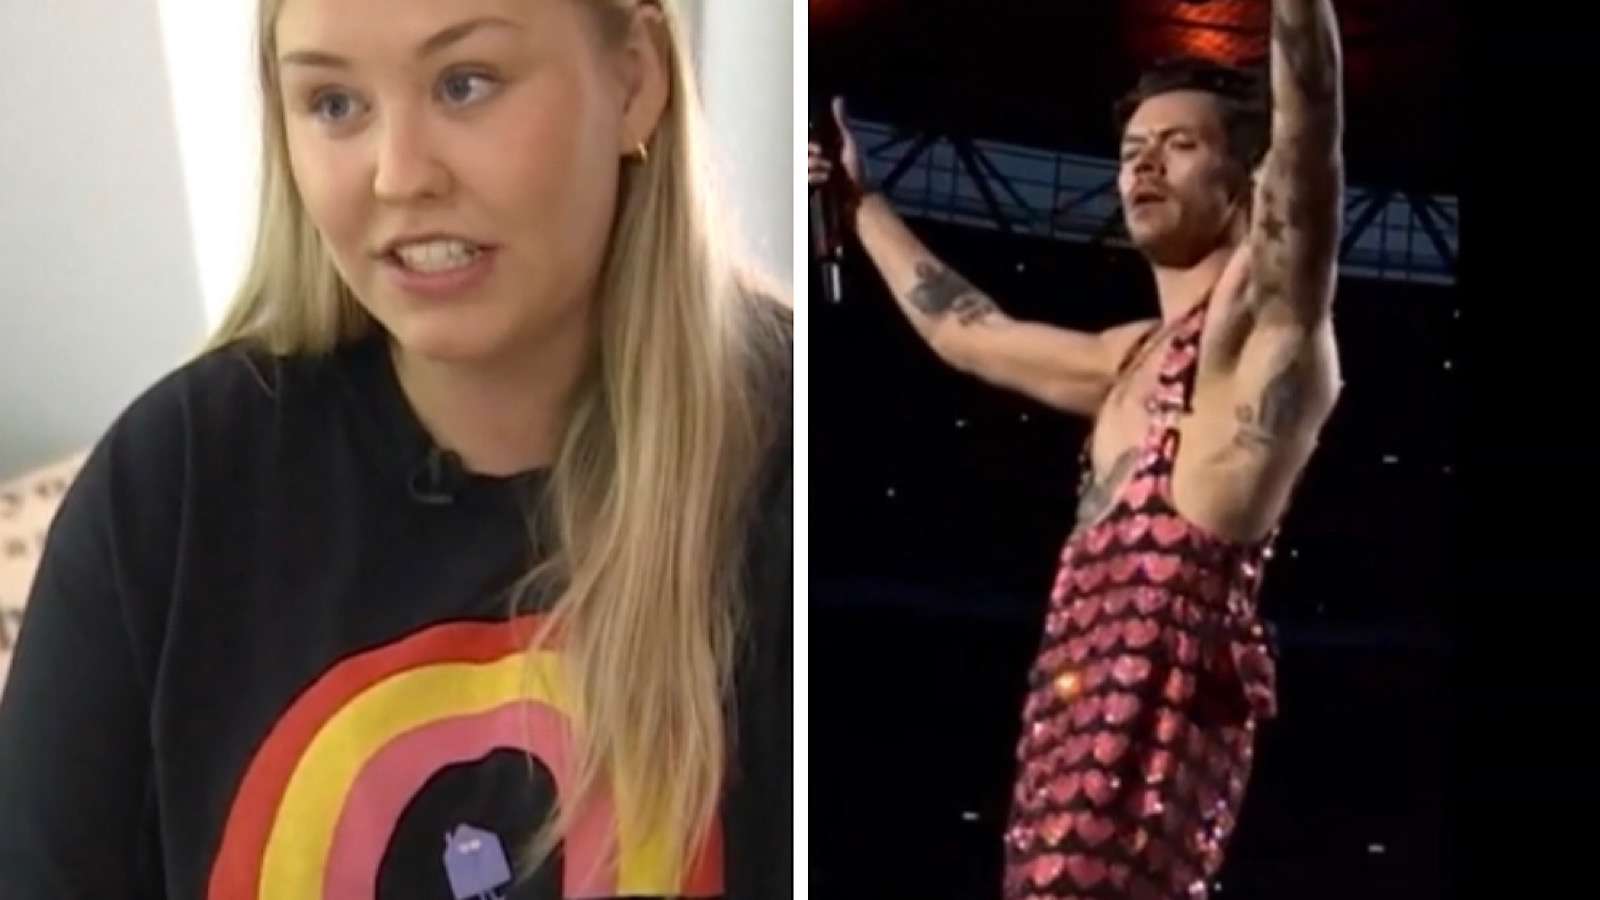 Nicole Myers attends a Harry Styles' concerts across the country before going completely deaf.